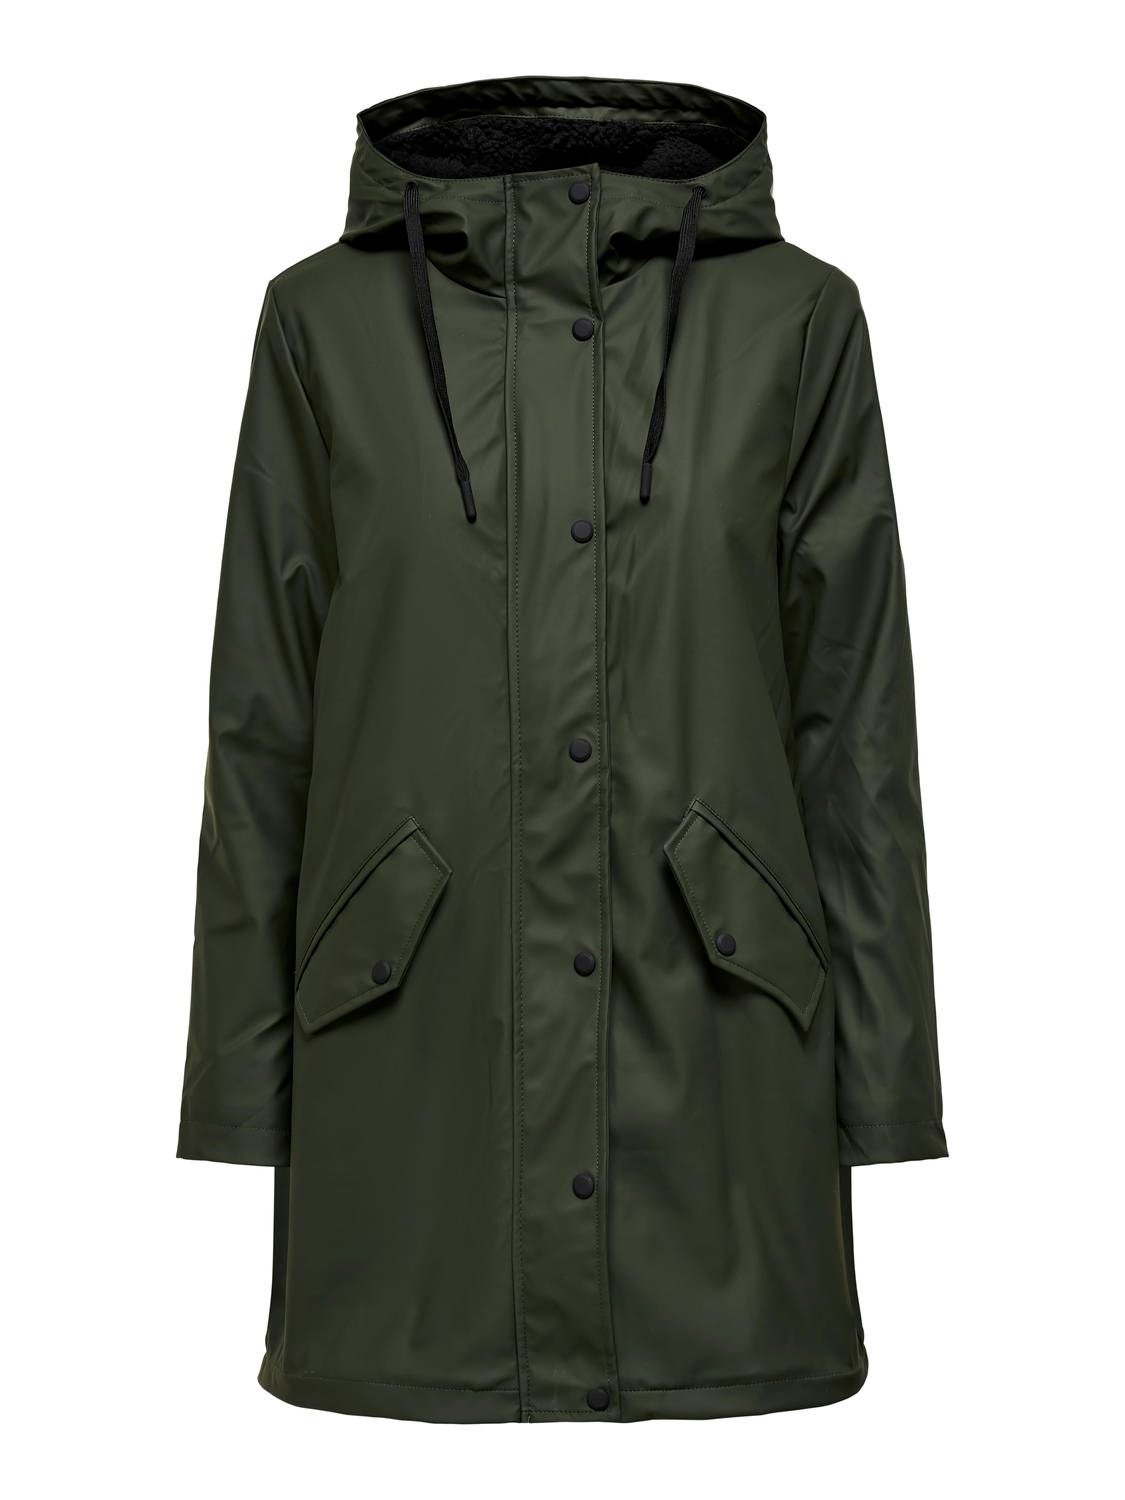 ONLY Rain jacket with teddy lining -Rosin - 15206116